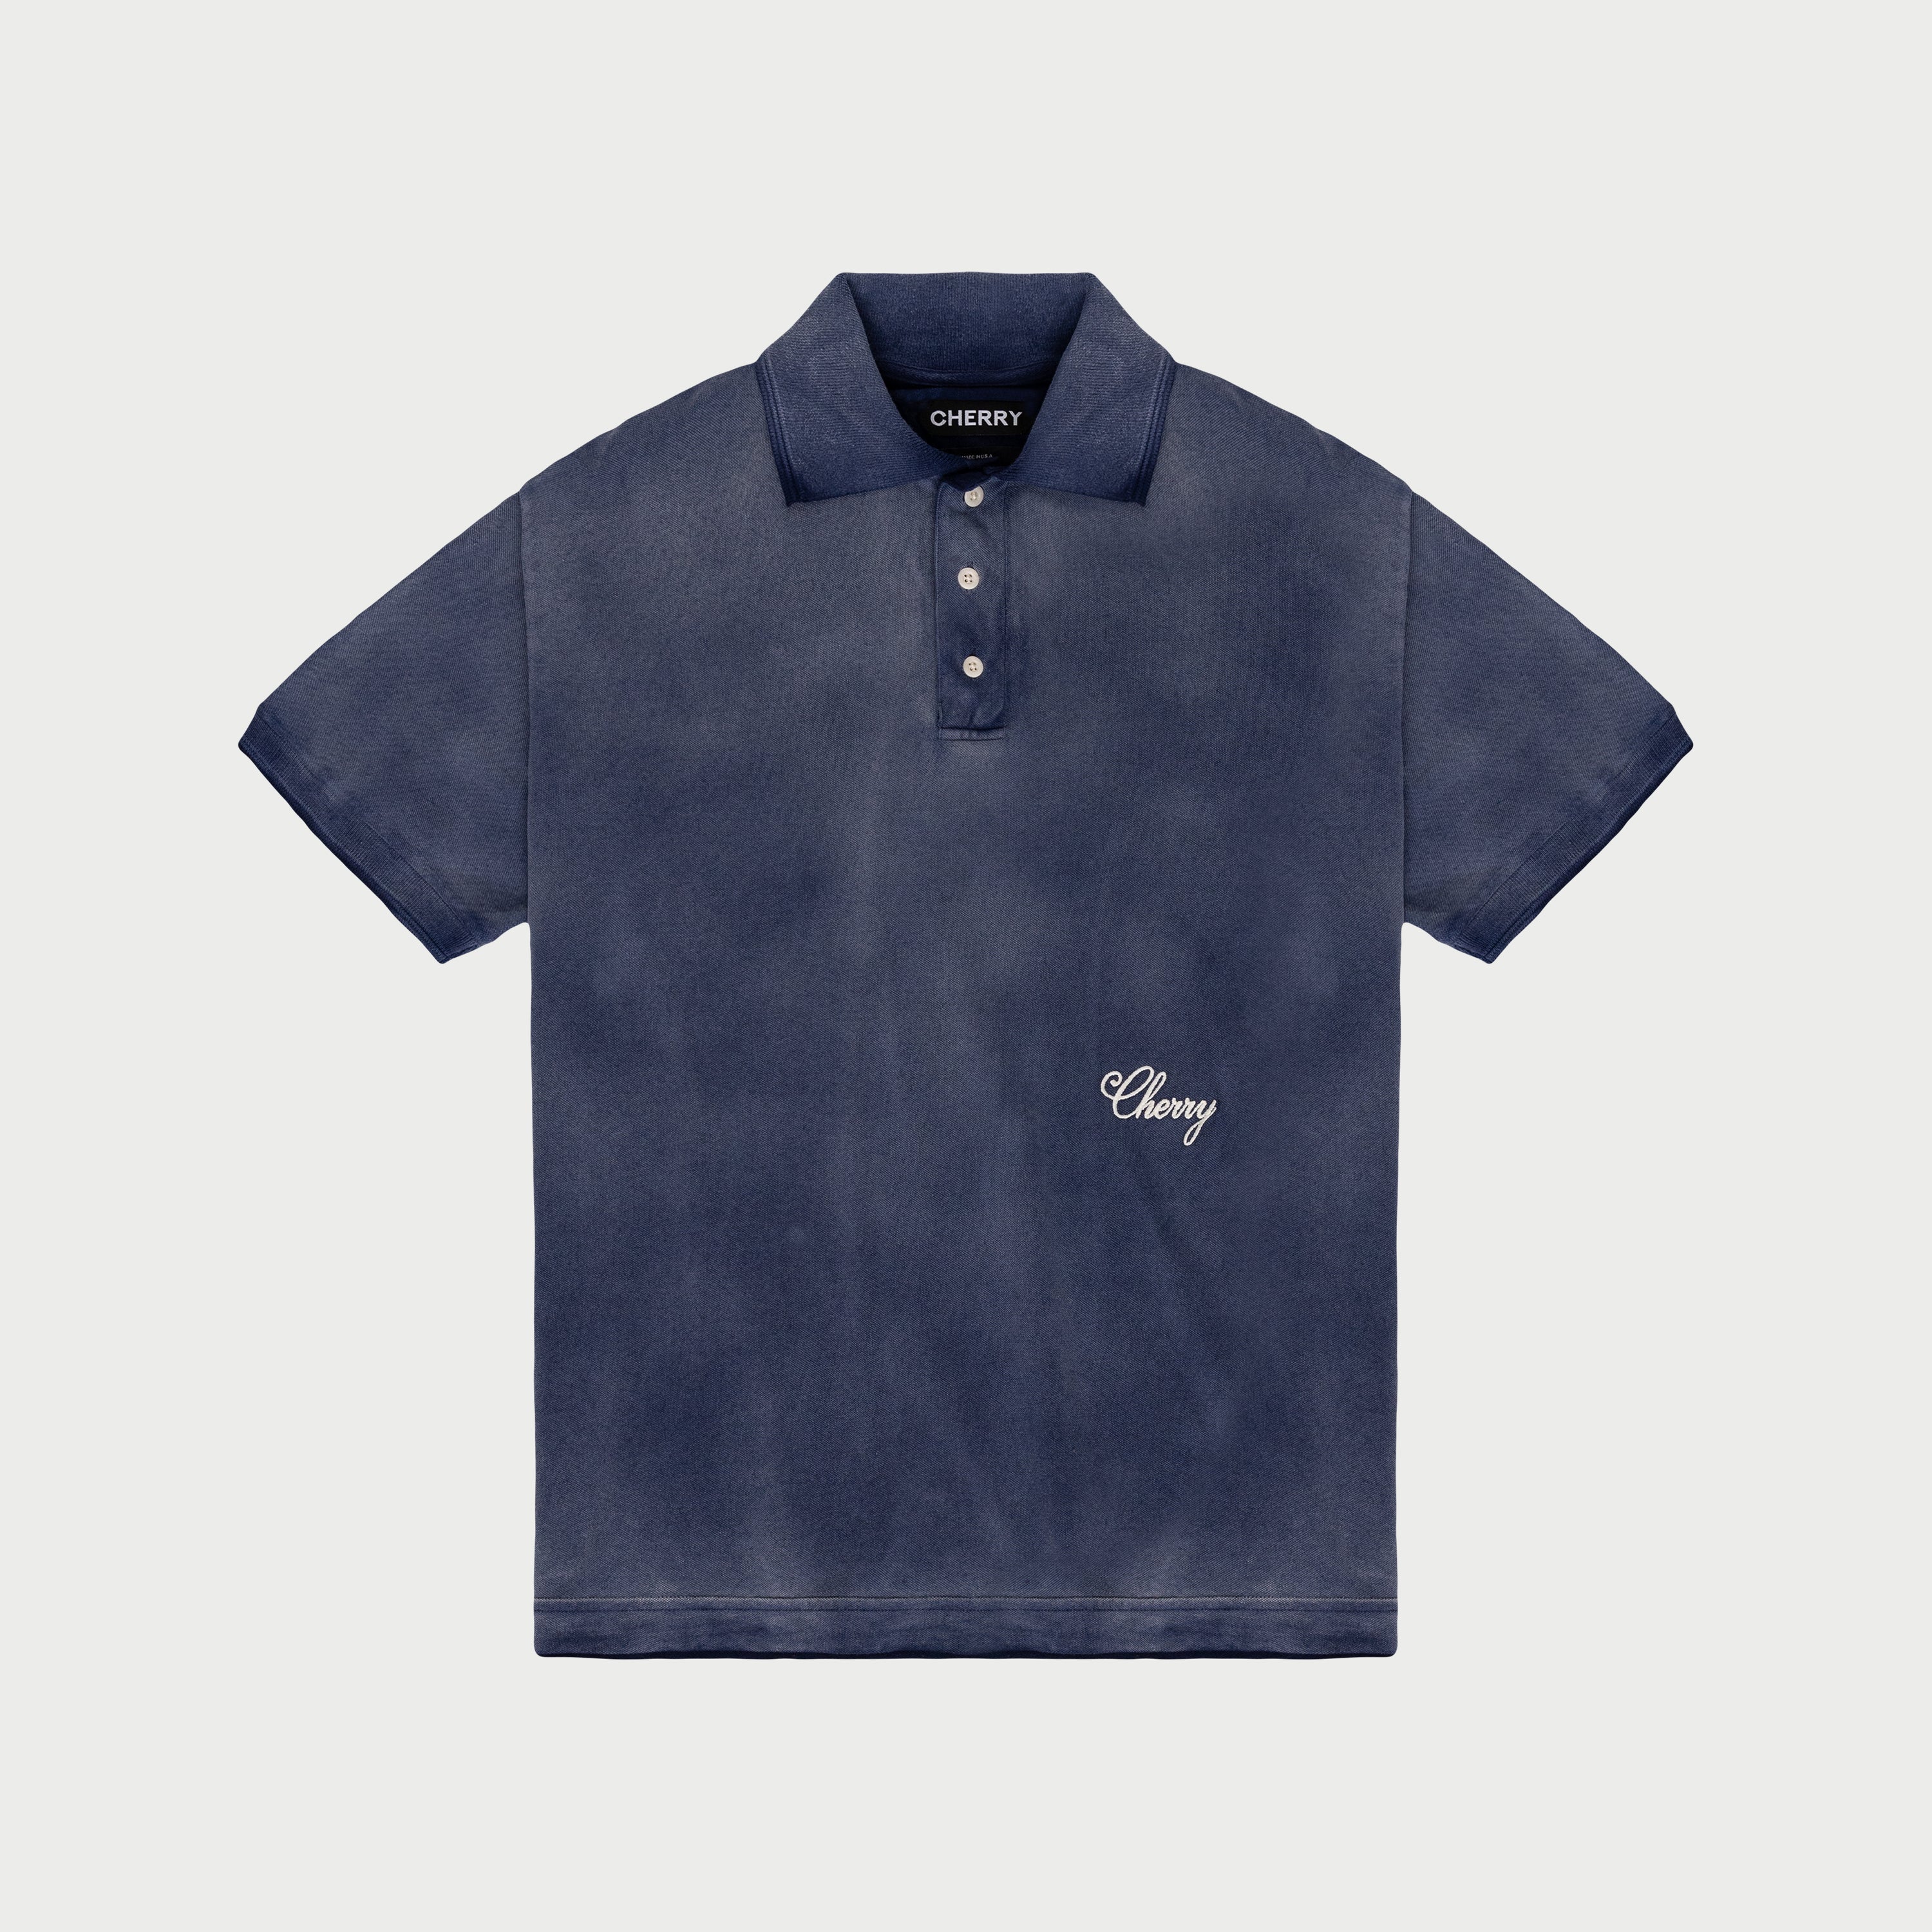 Vintage_Polo_navy_front-1.jpg